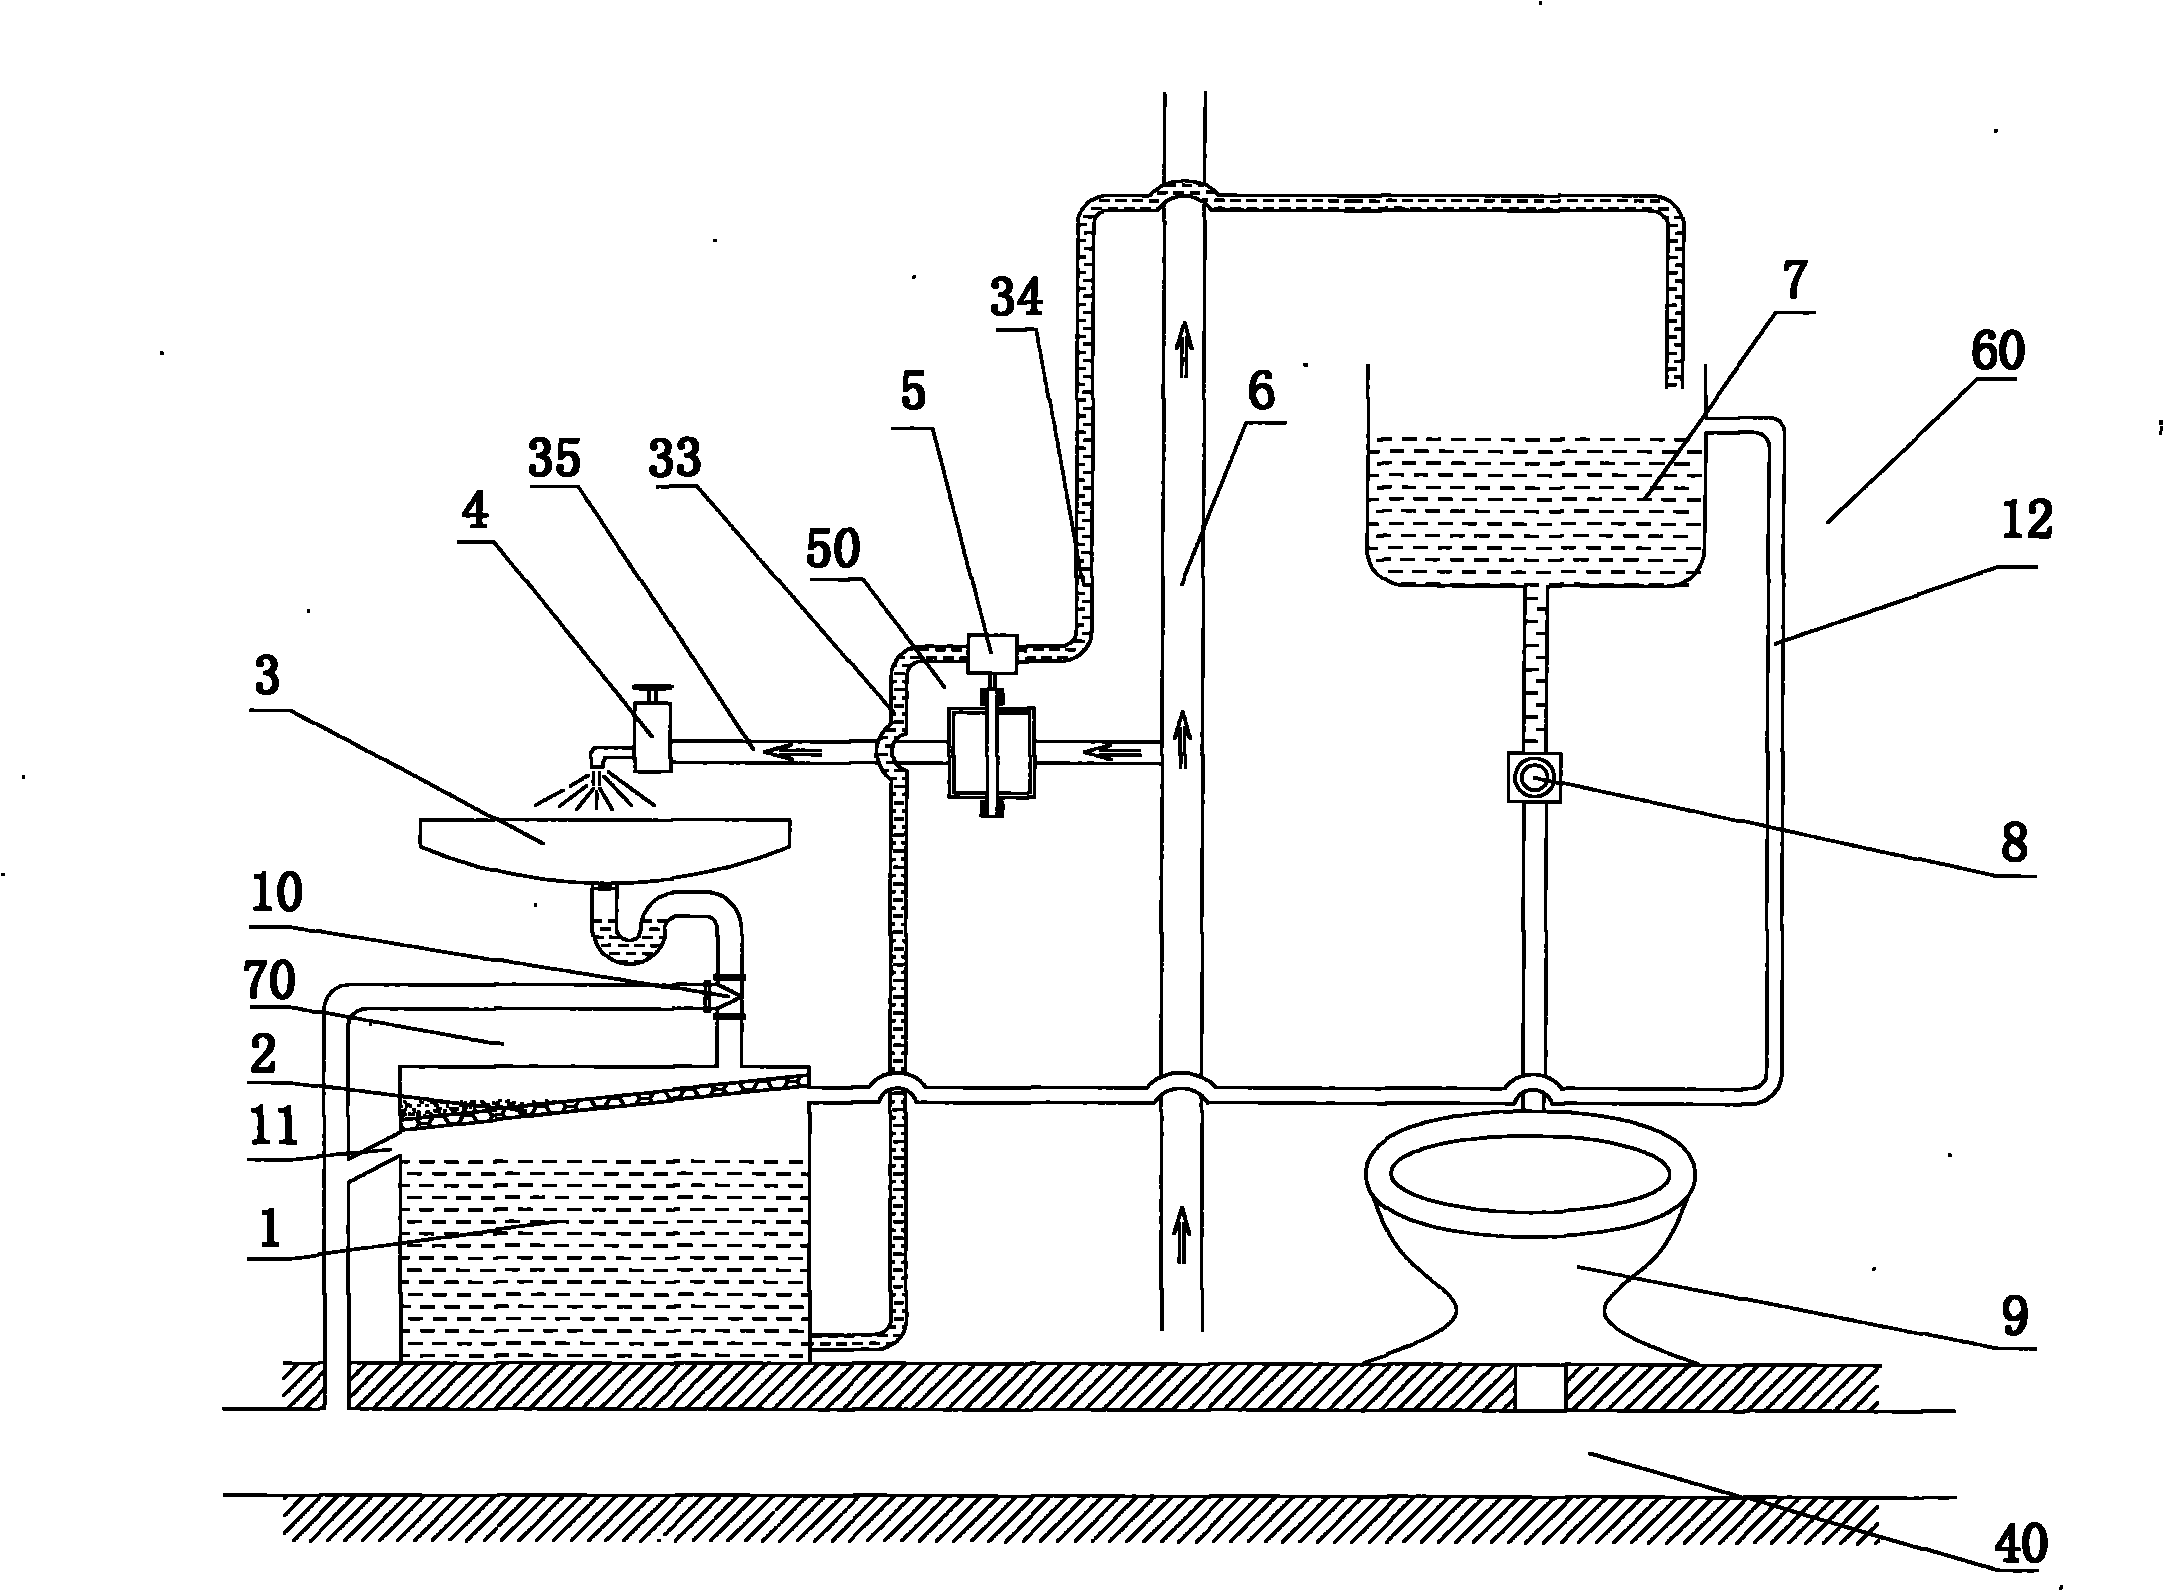 Graywater recycling device based on hose water pressure drive motor